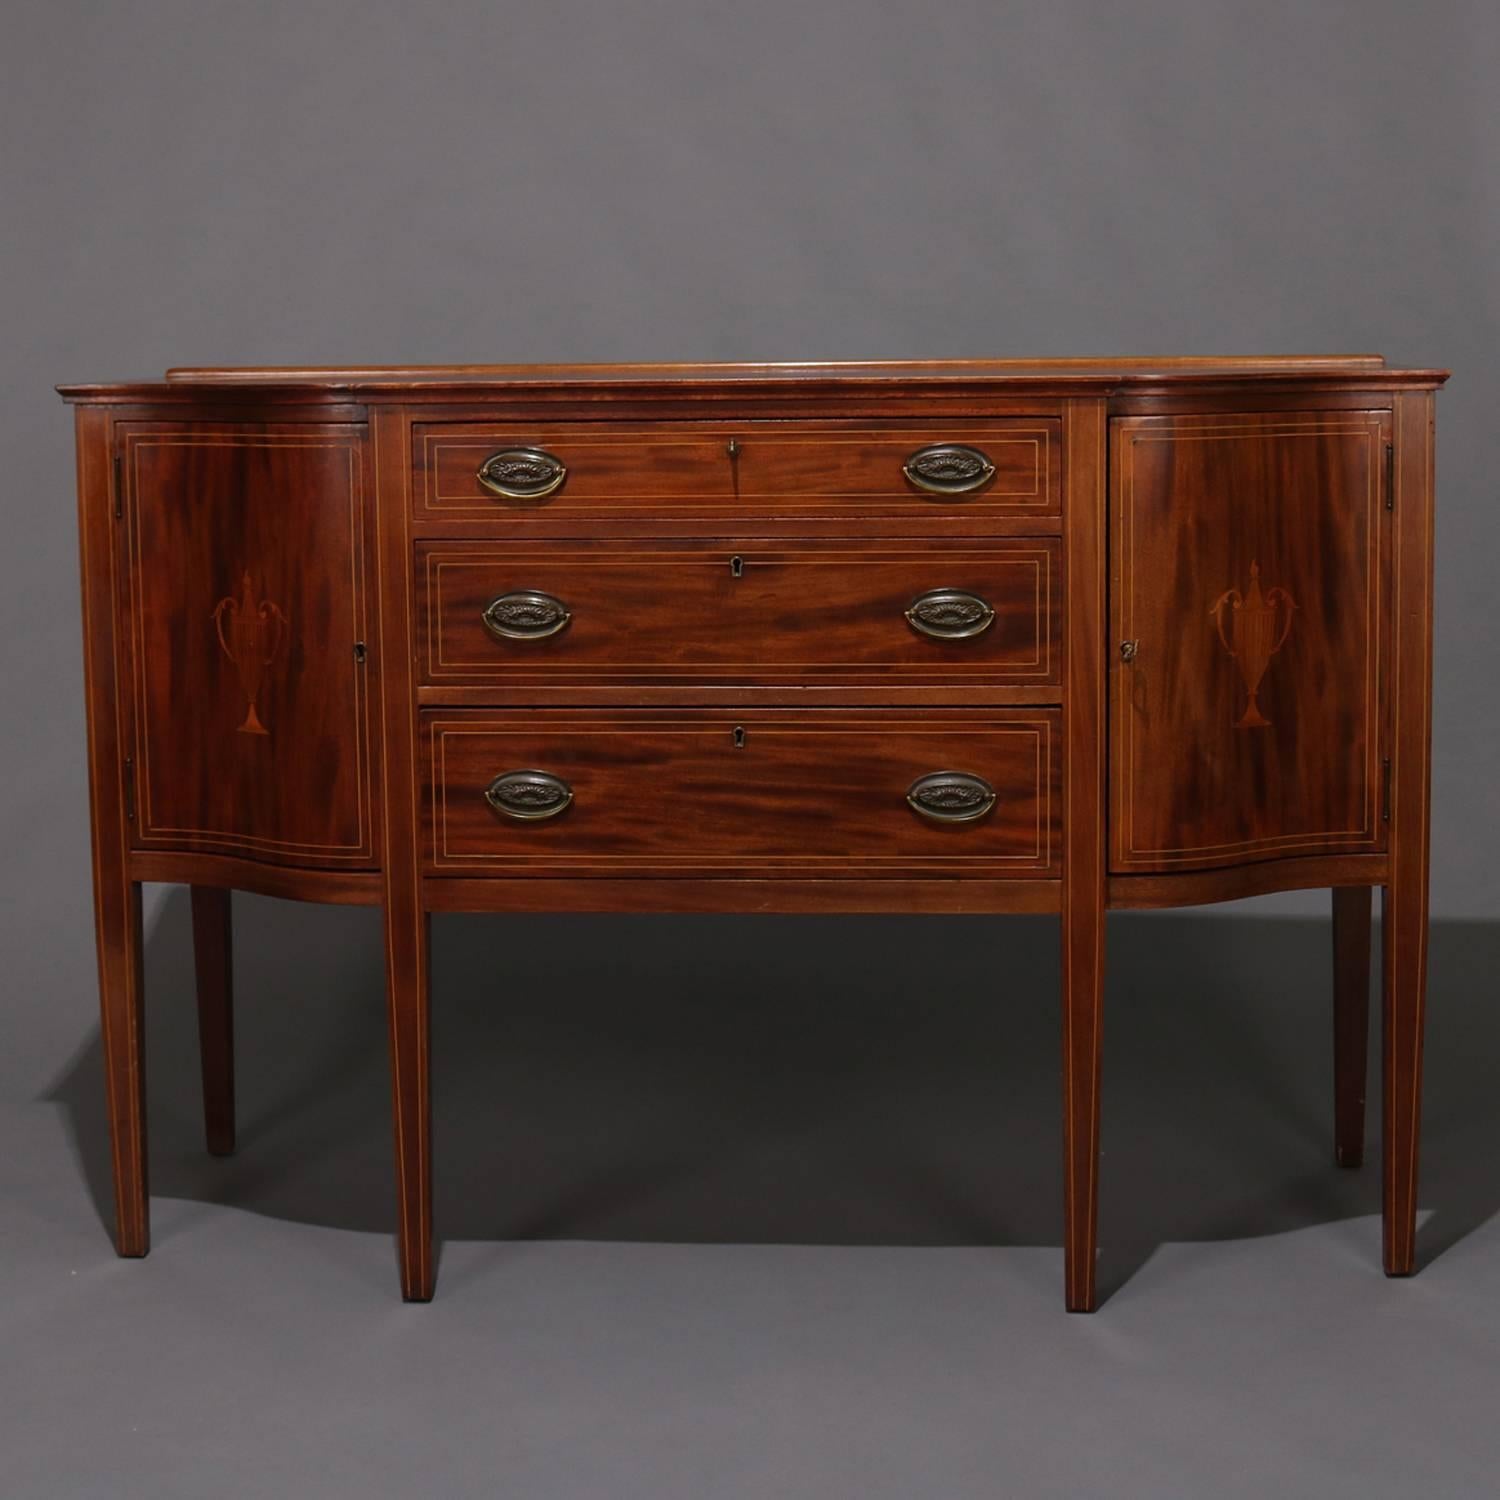 Antique Hepplewhite sideboard features deeply striated mahogany construction having three central drawers with flanking side cabinets and seated on tapered legs, satinwood banding throughout, inlaid side doors having urn motif, bronze pulls, locking